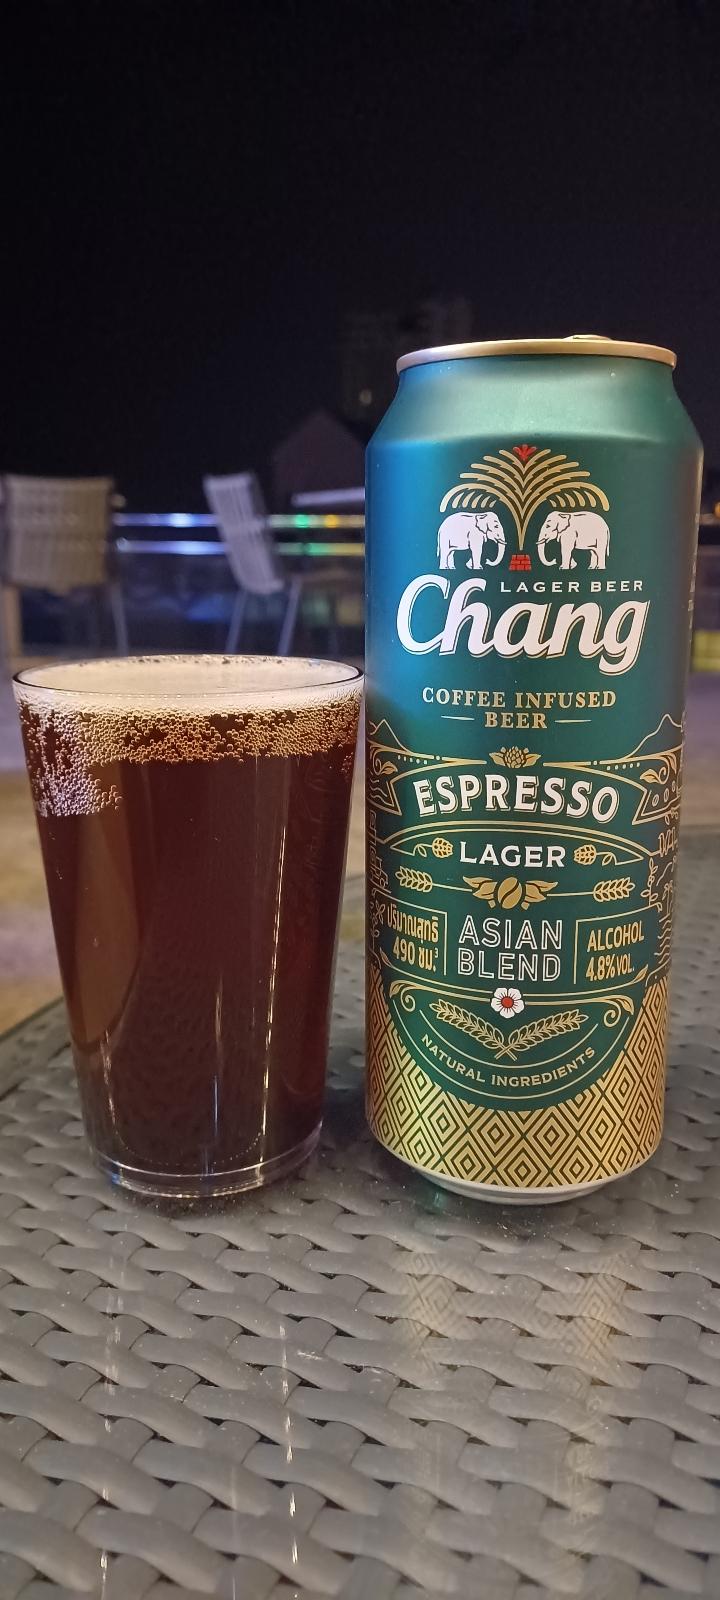 Chang Espresso Lager - Asian Blend